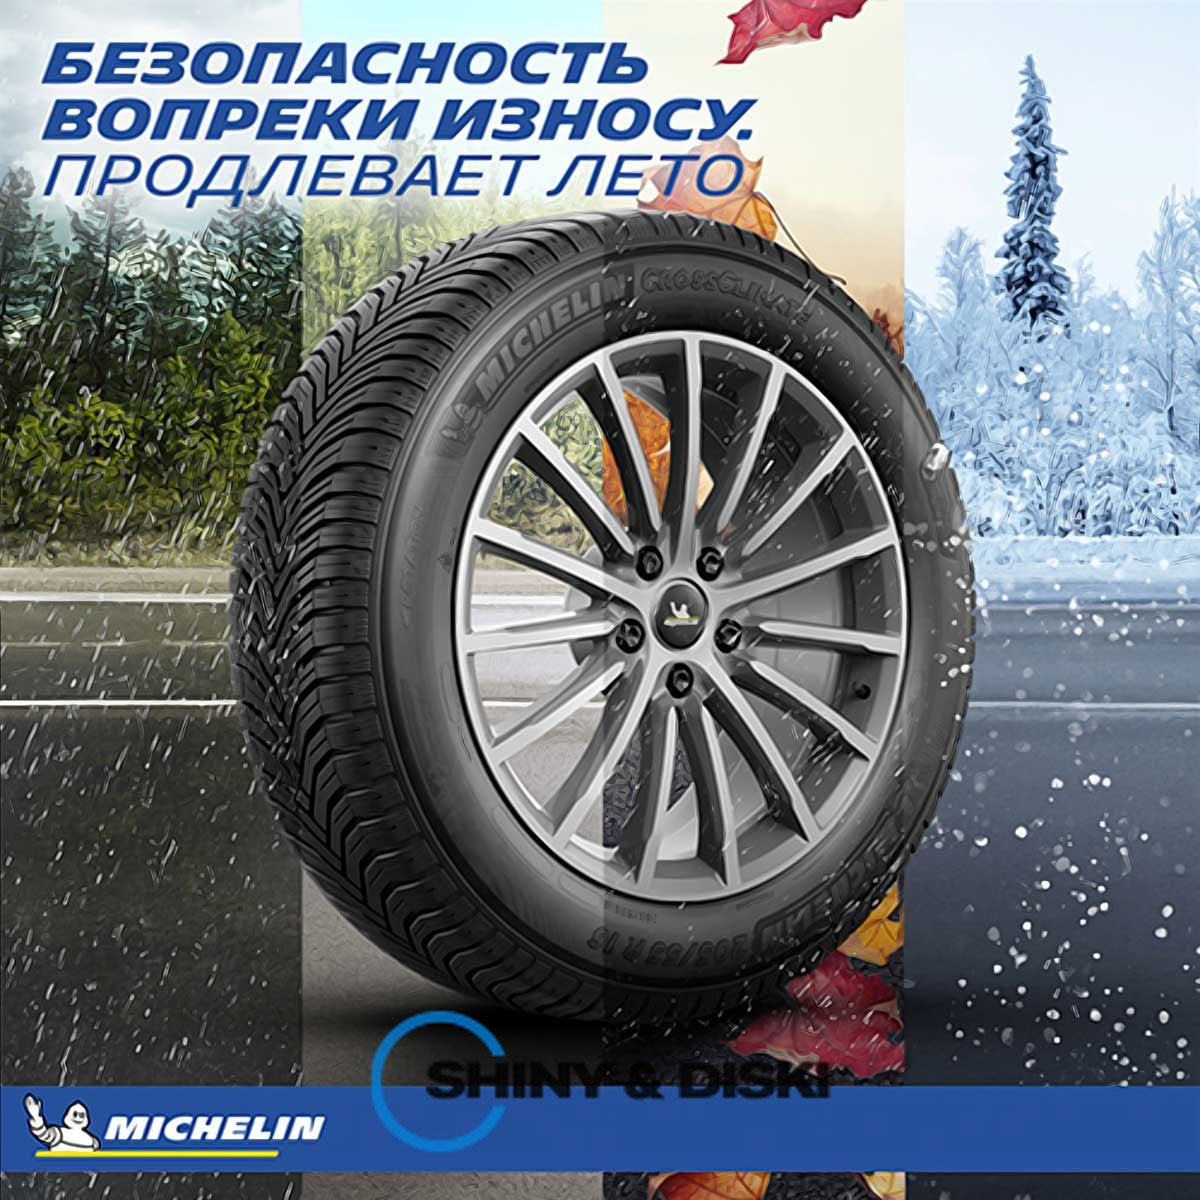 покрышки michelin cross climate+ 185/60 r14 86h xl